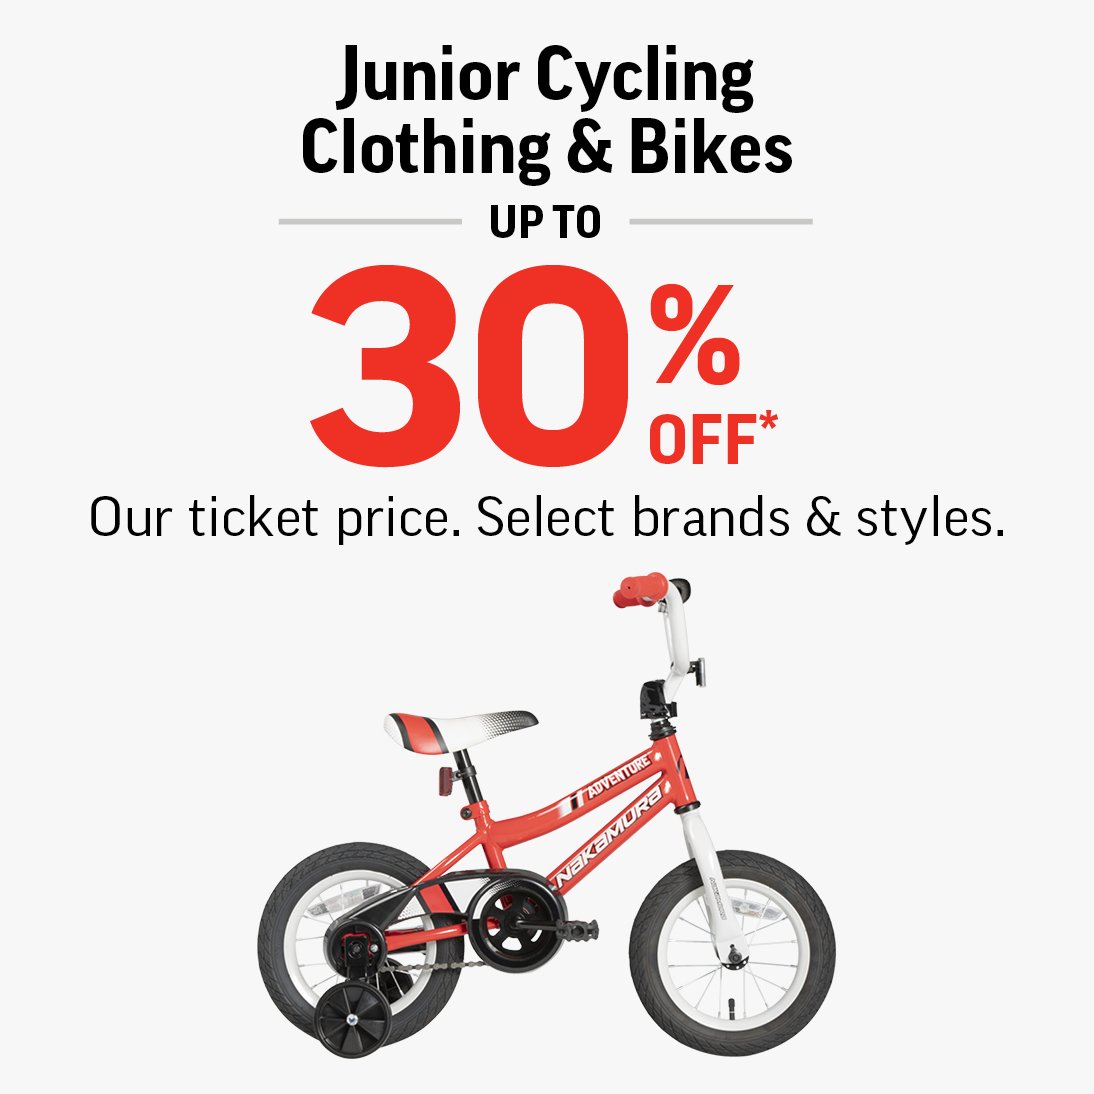 JUNIOR CYCLING CLOTHING & BIKES UP TO 30% OFF